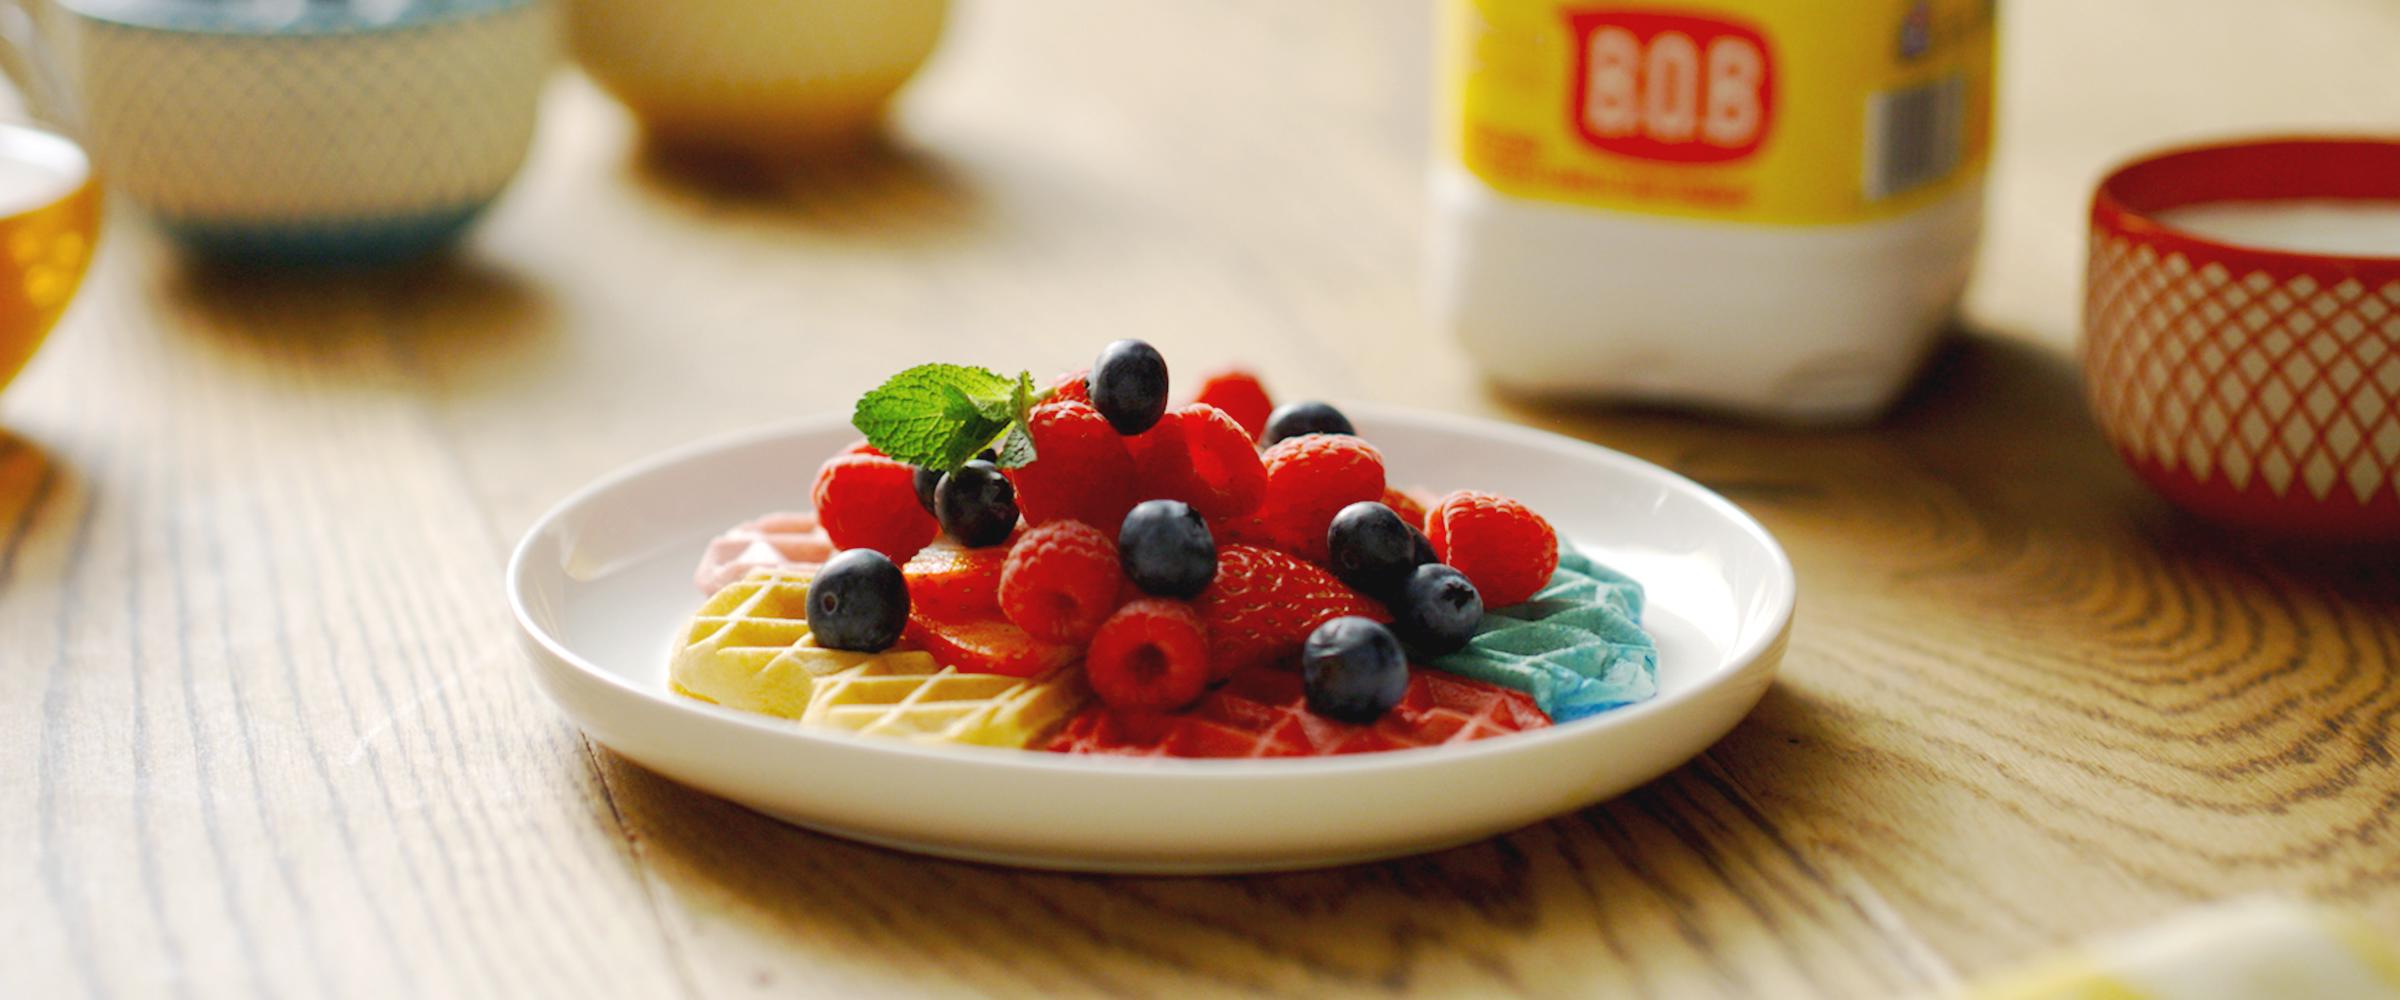 Rainbow waffles topped with berries and mint